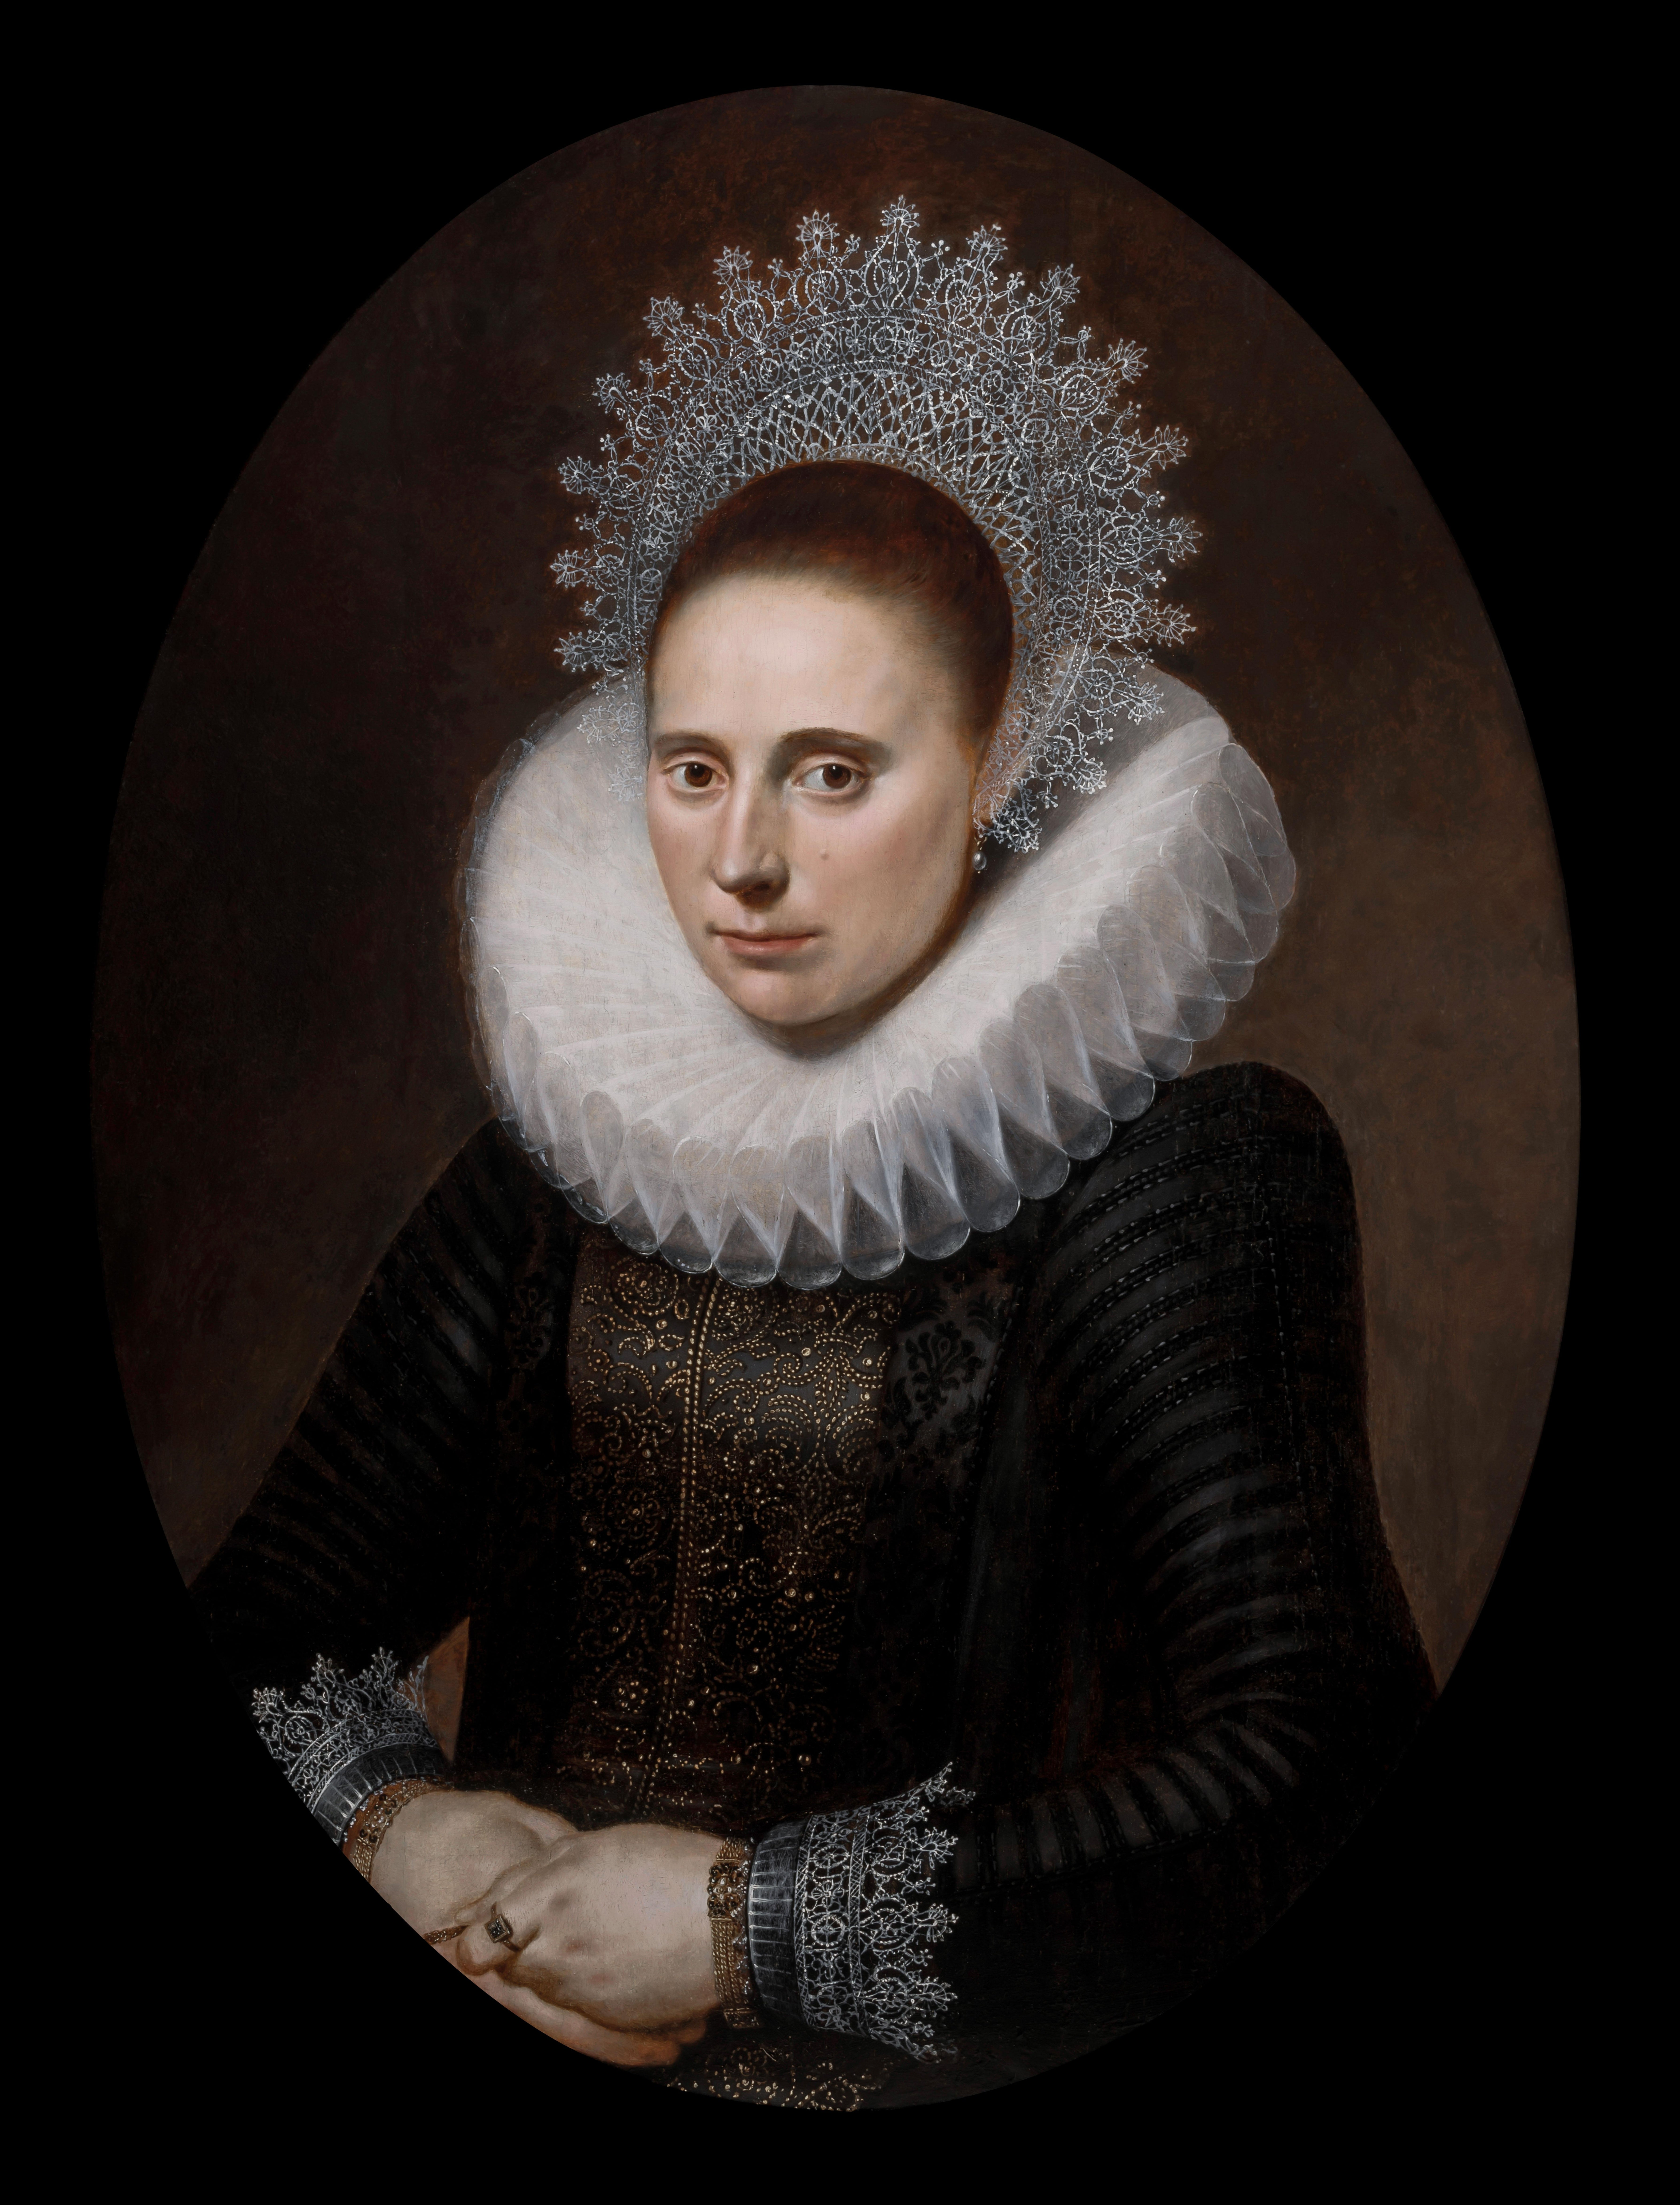 This magnificent oil on panel portrait, presented by Titan Fine Art, is a splendid example of the sumptuous female portraits that were painted for members of the upper echelons of society during the early part of the 1600’s.  The artist has rendered